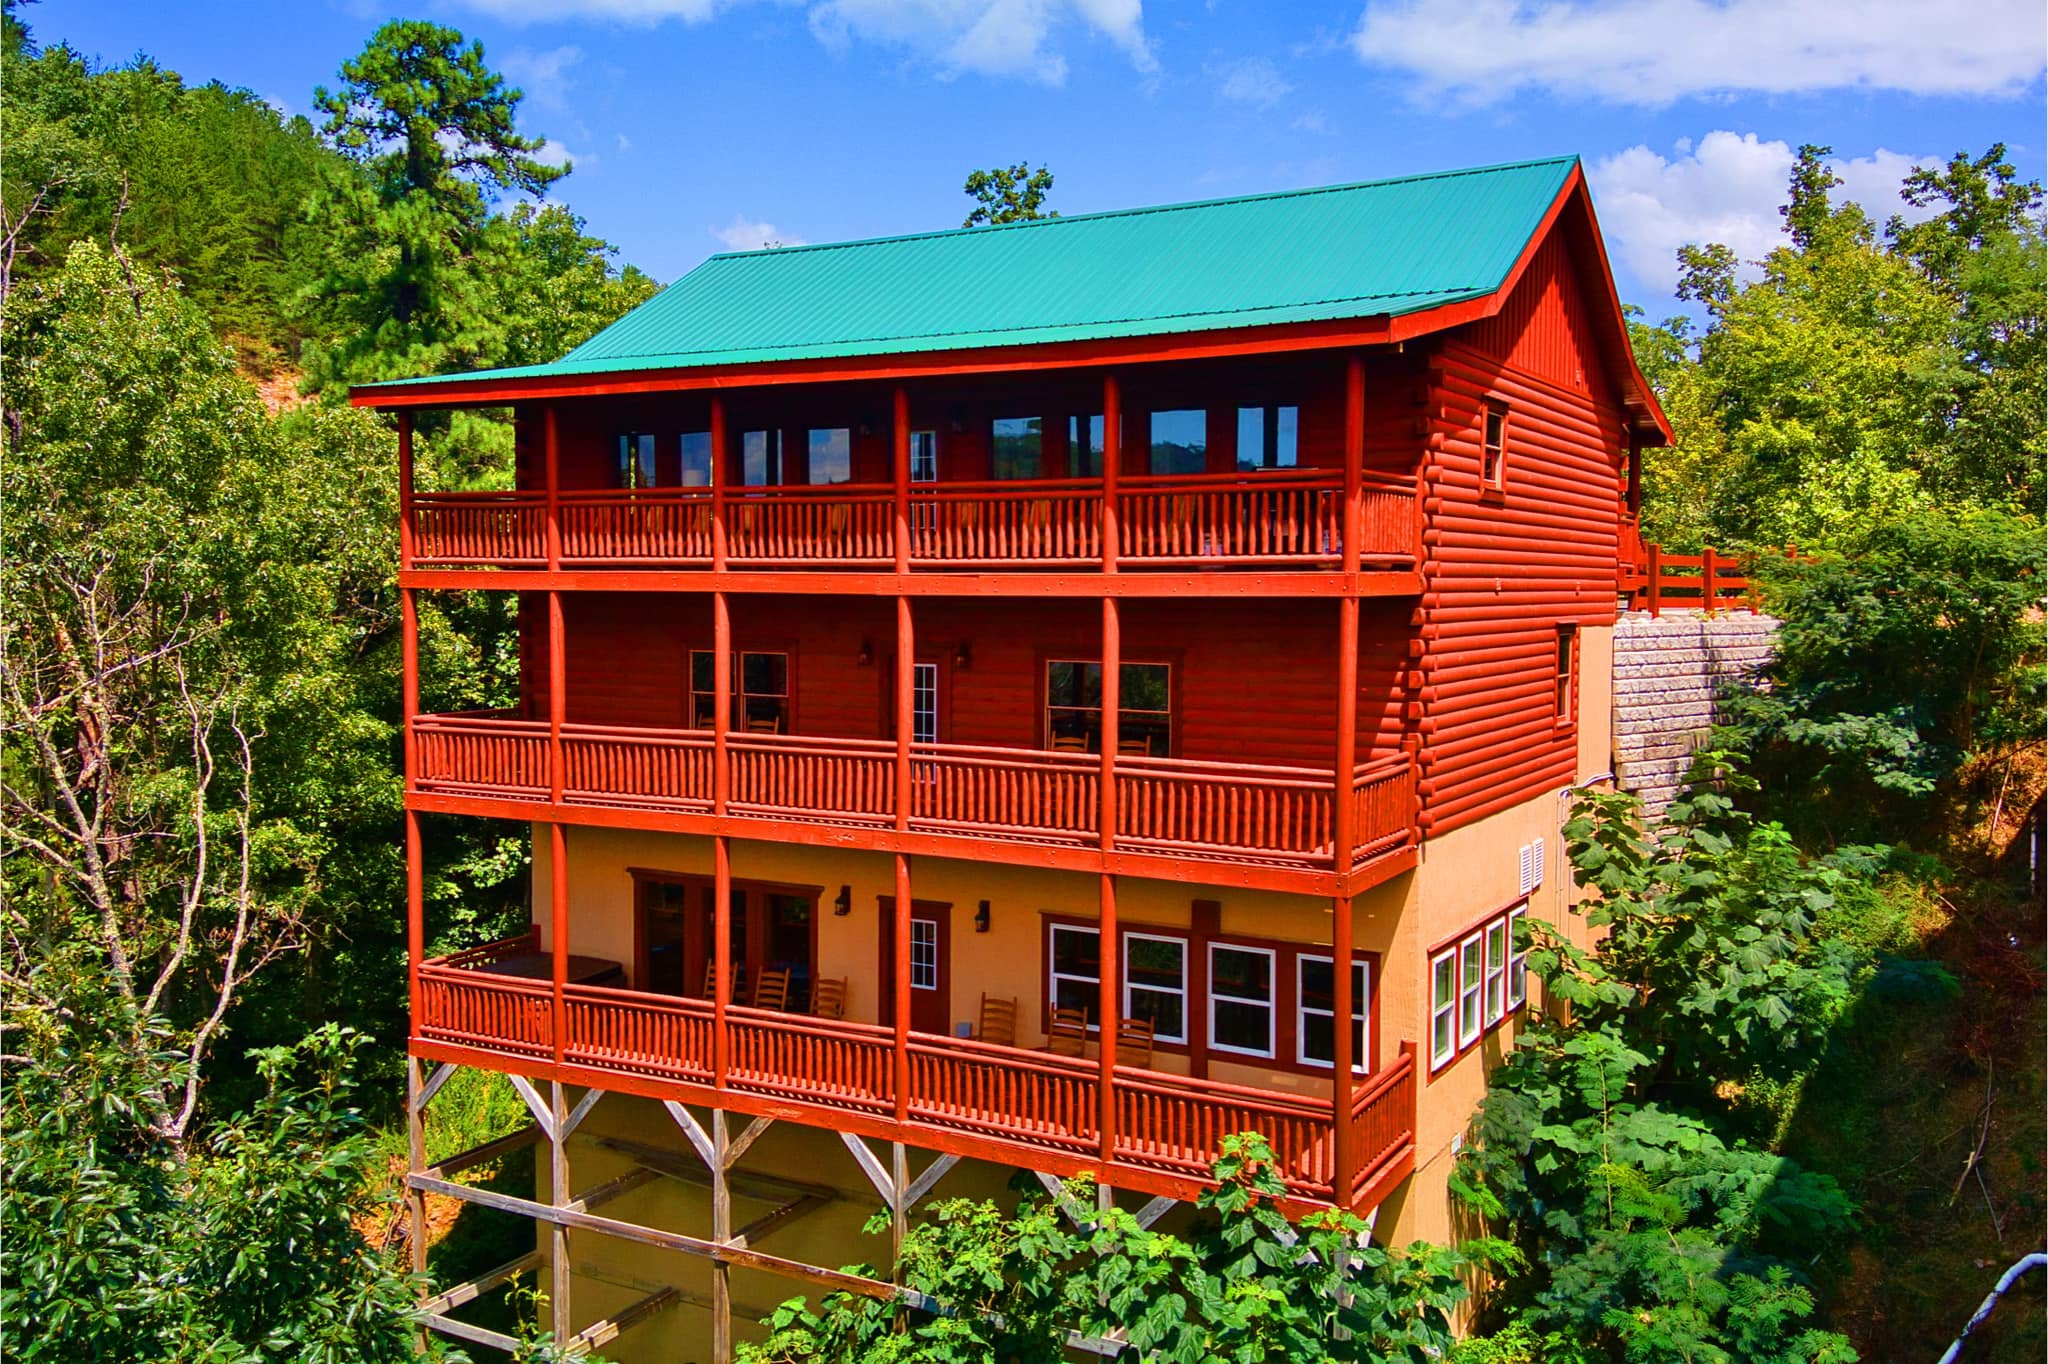 Enjoy the Spring Festivities in Gatlinburg with Your Family. Stay in The Smoky Mountain Cabins